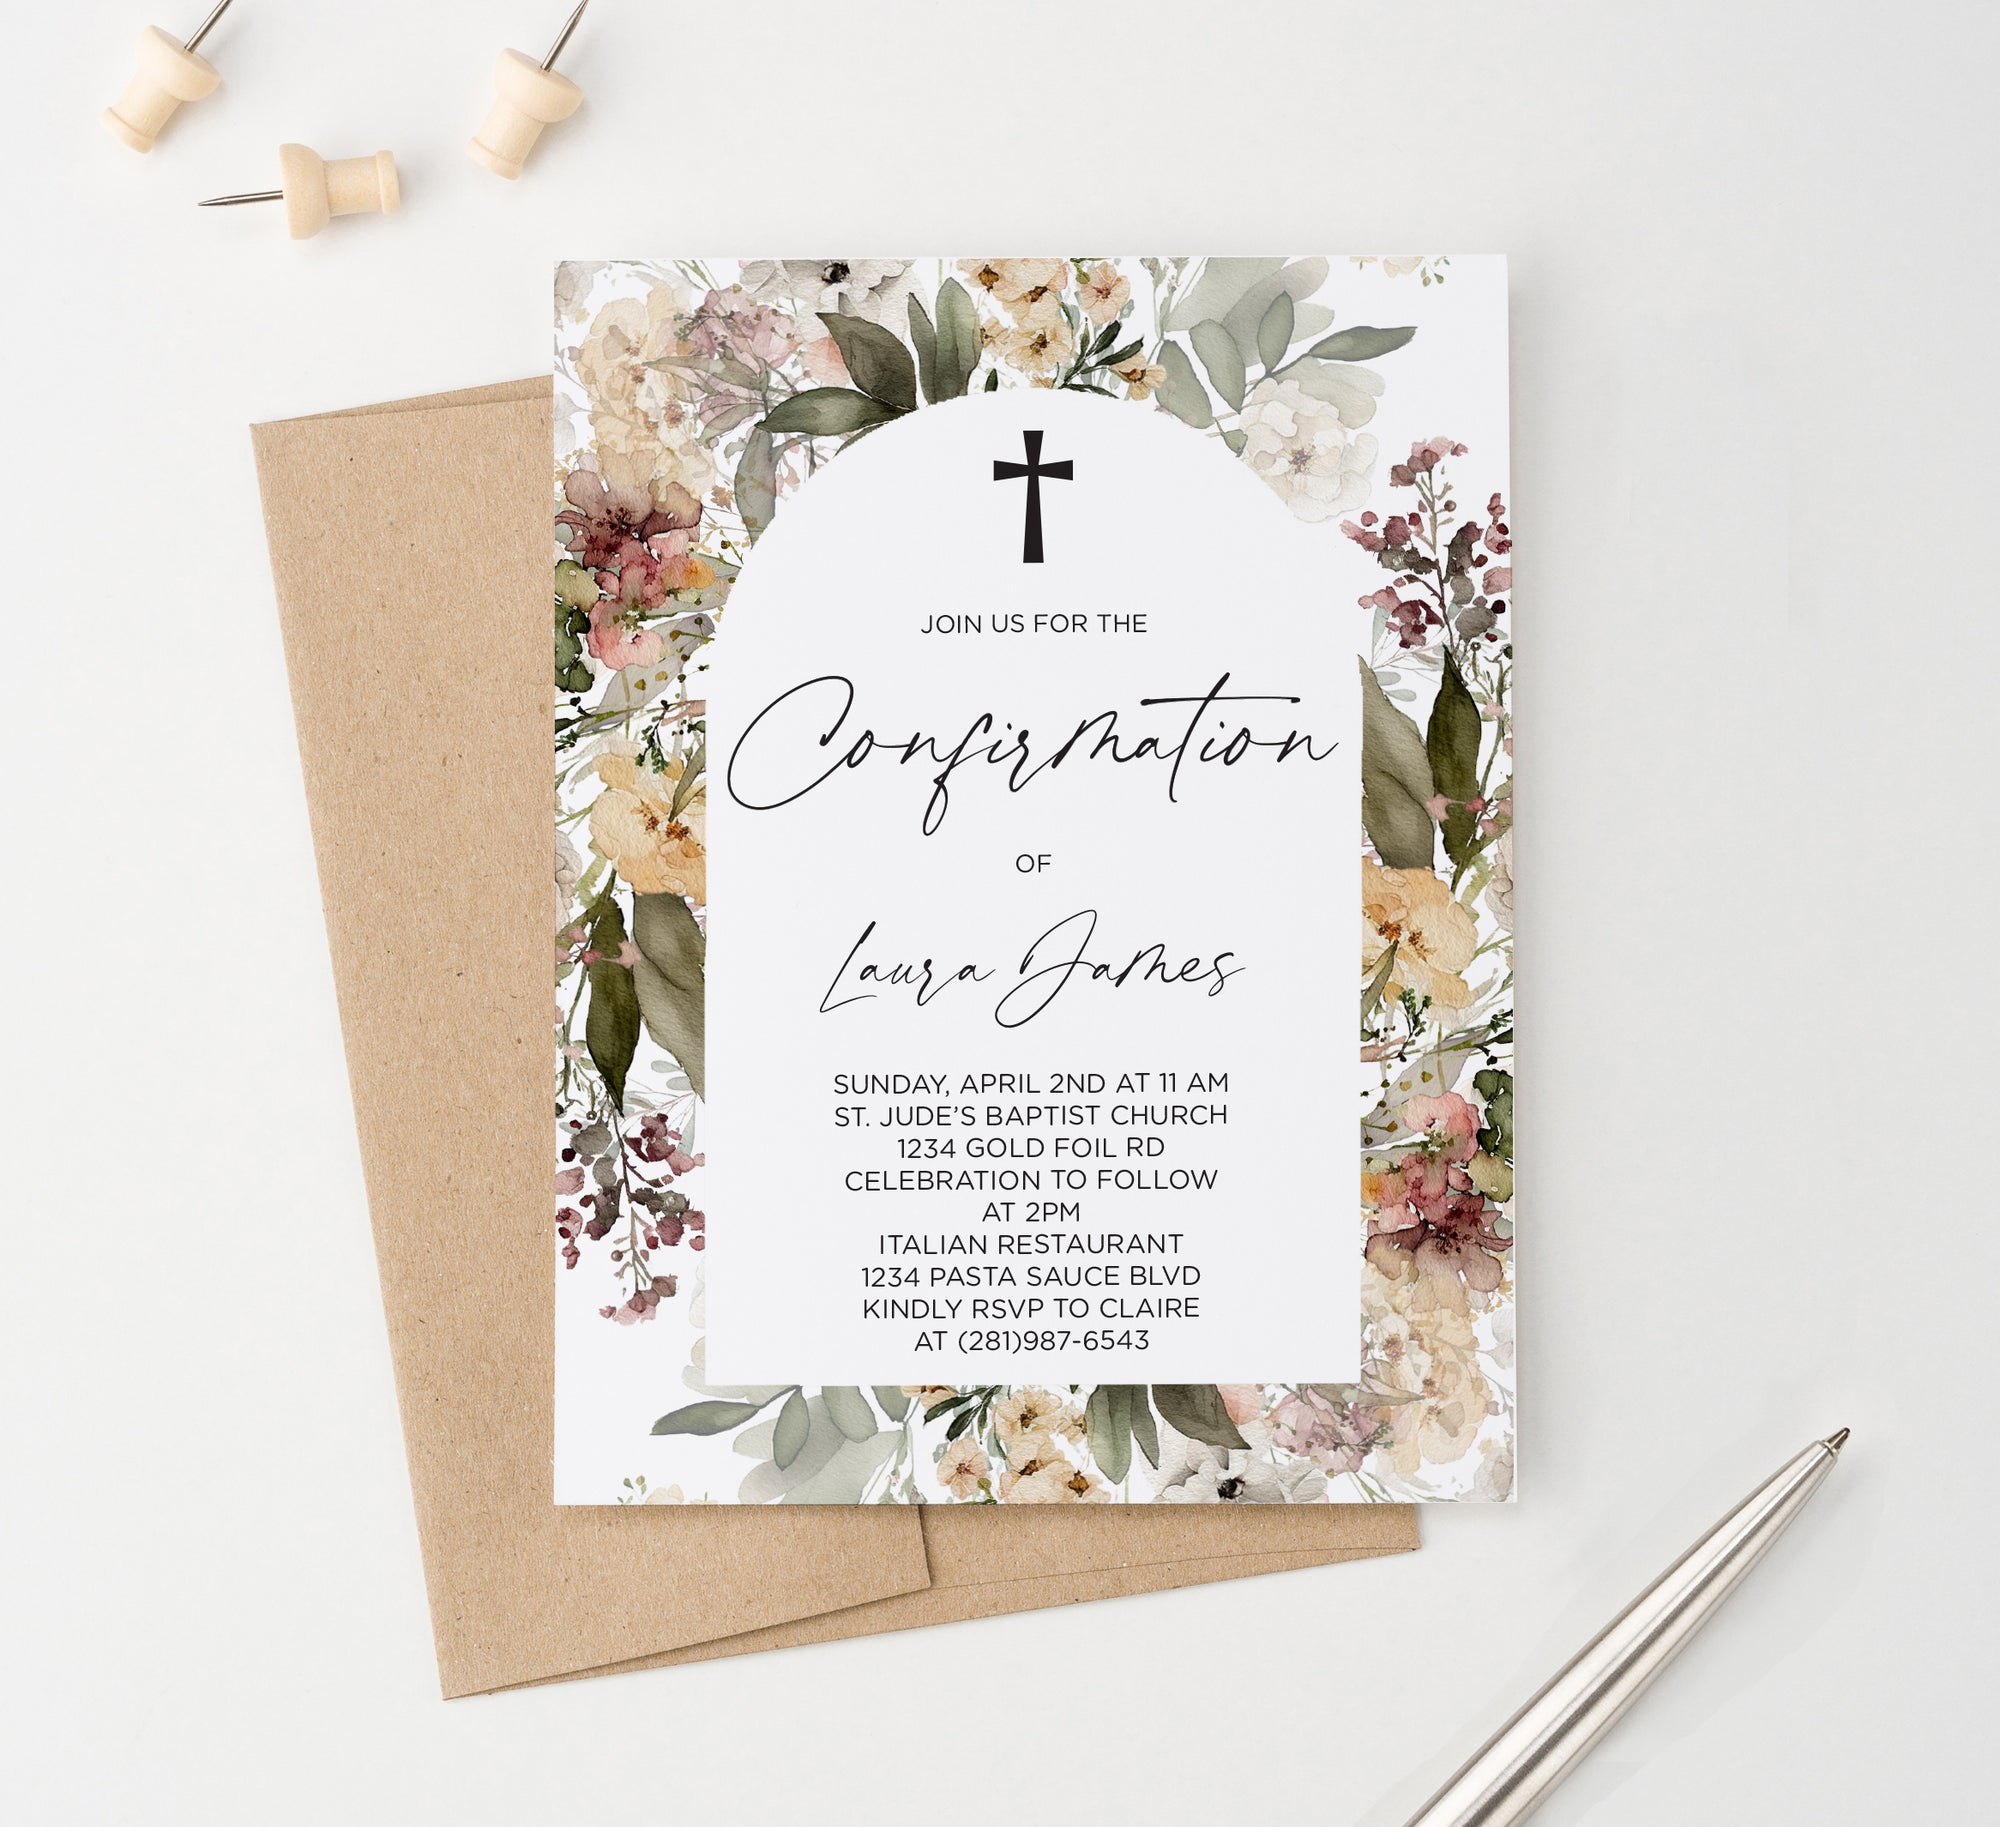 Elegant Confirmation Card Invitation With Floral Arch